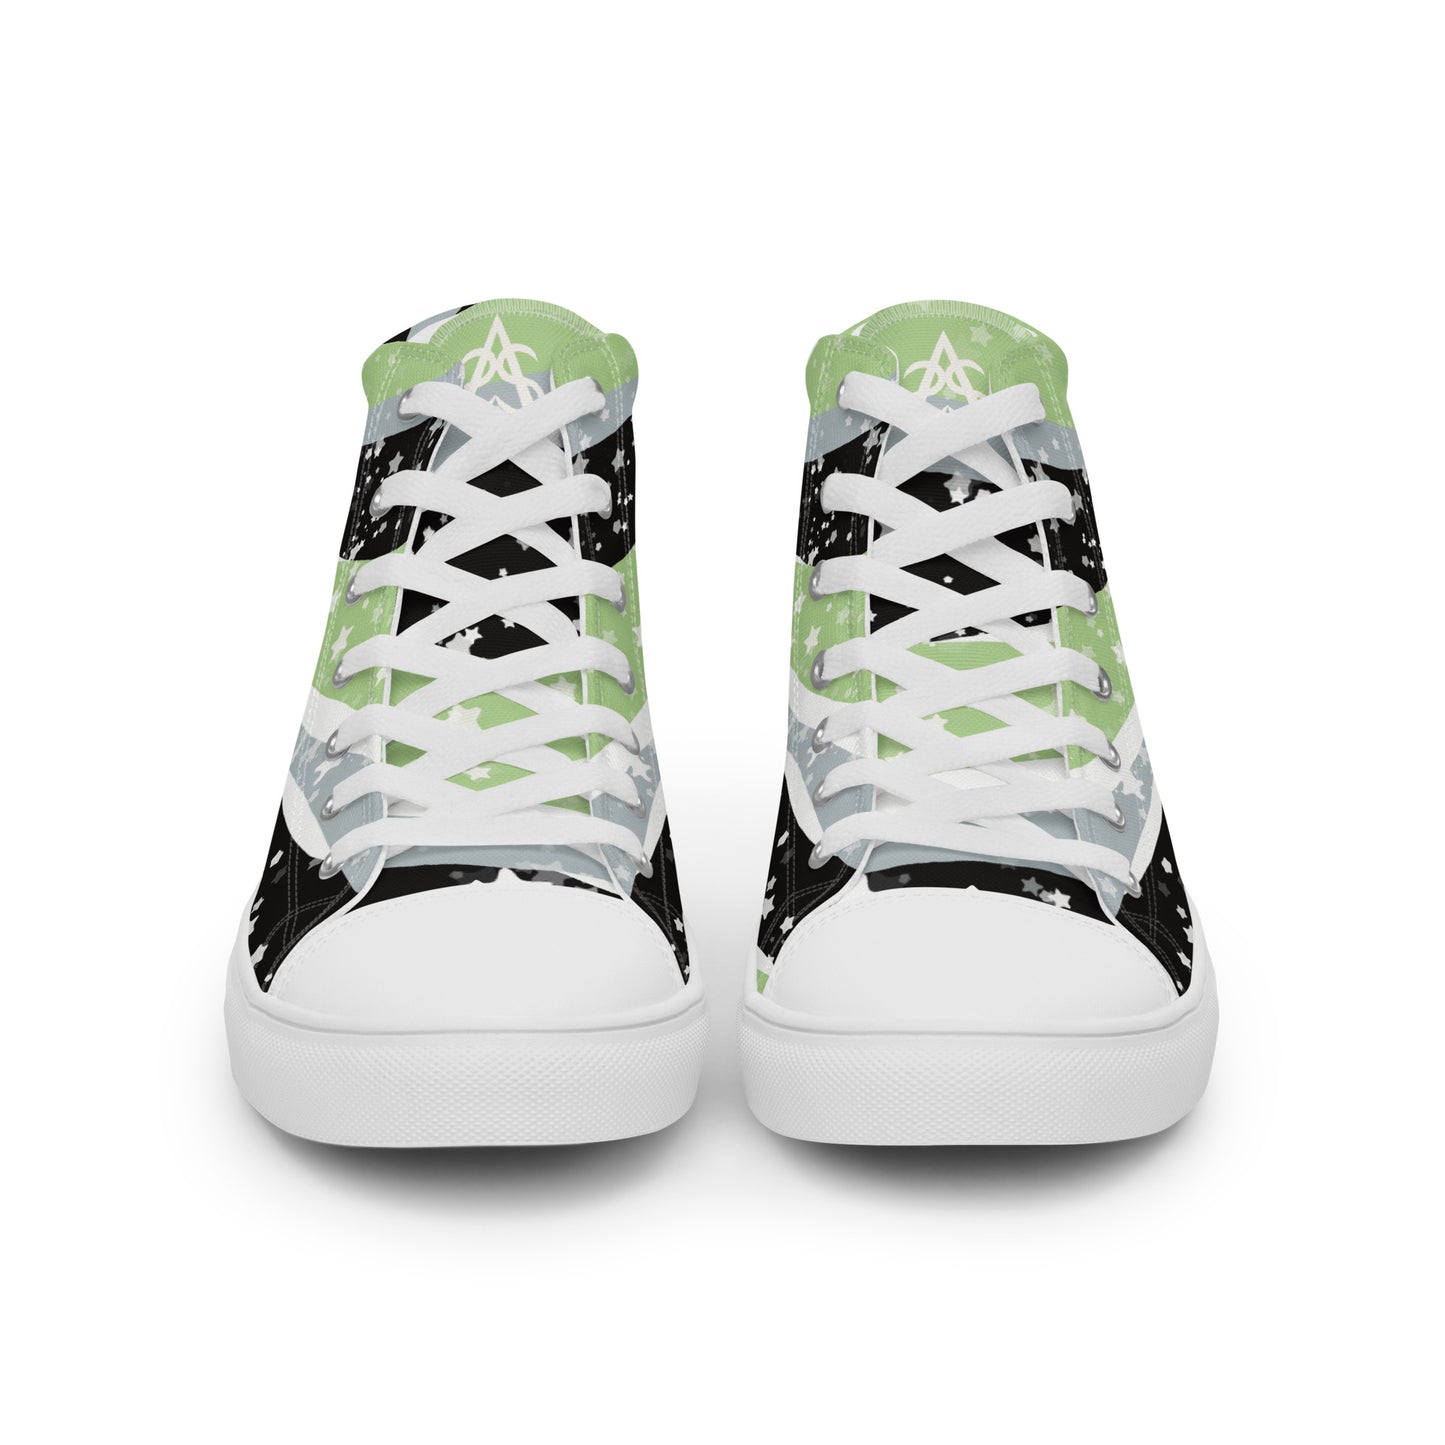 Starry Agender High Top Canvas Shoes (Fem Sizing)